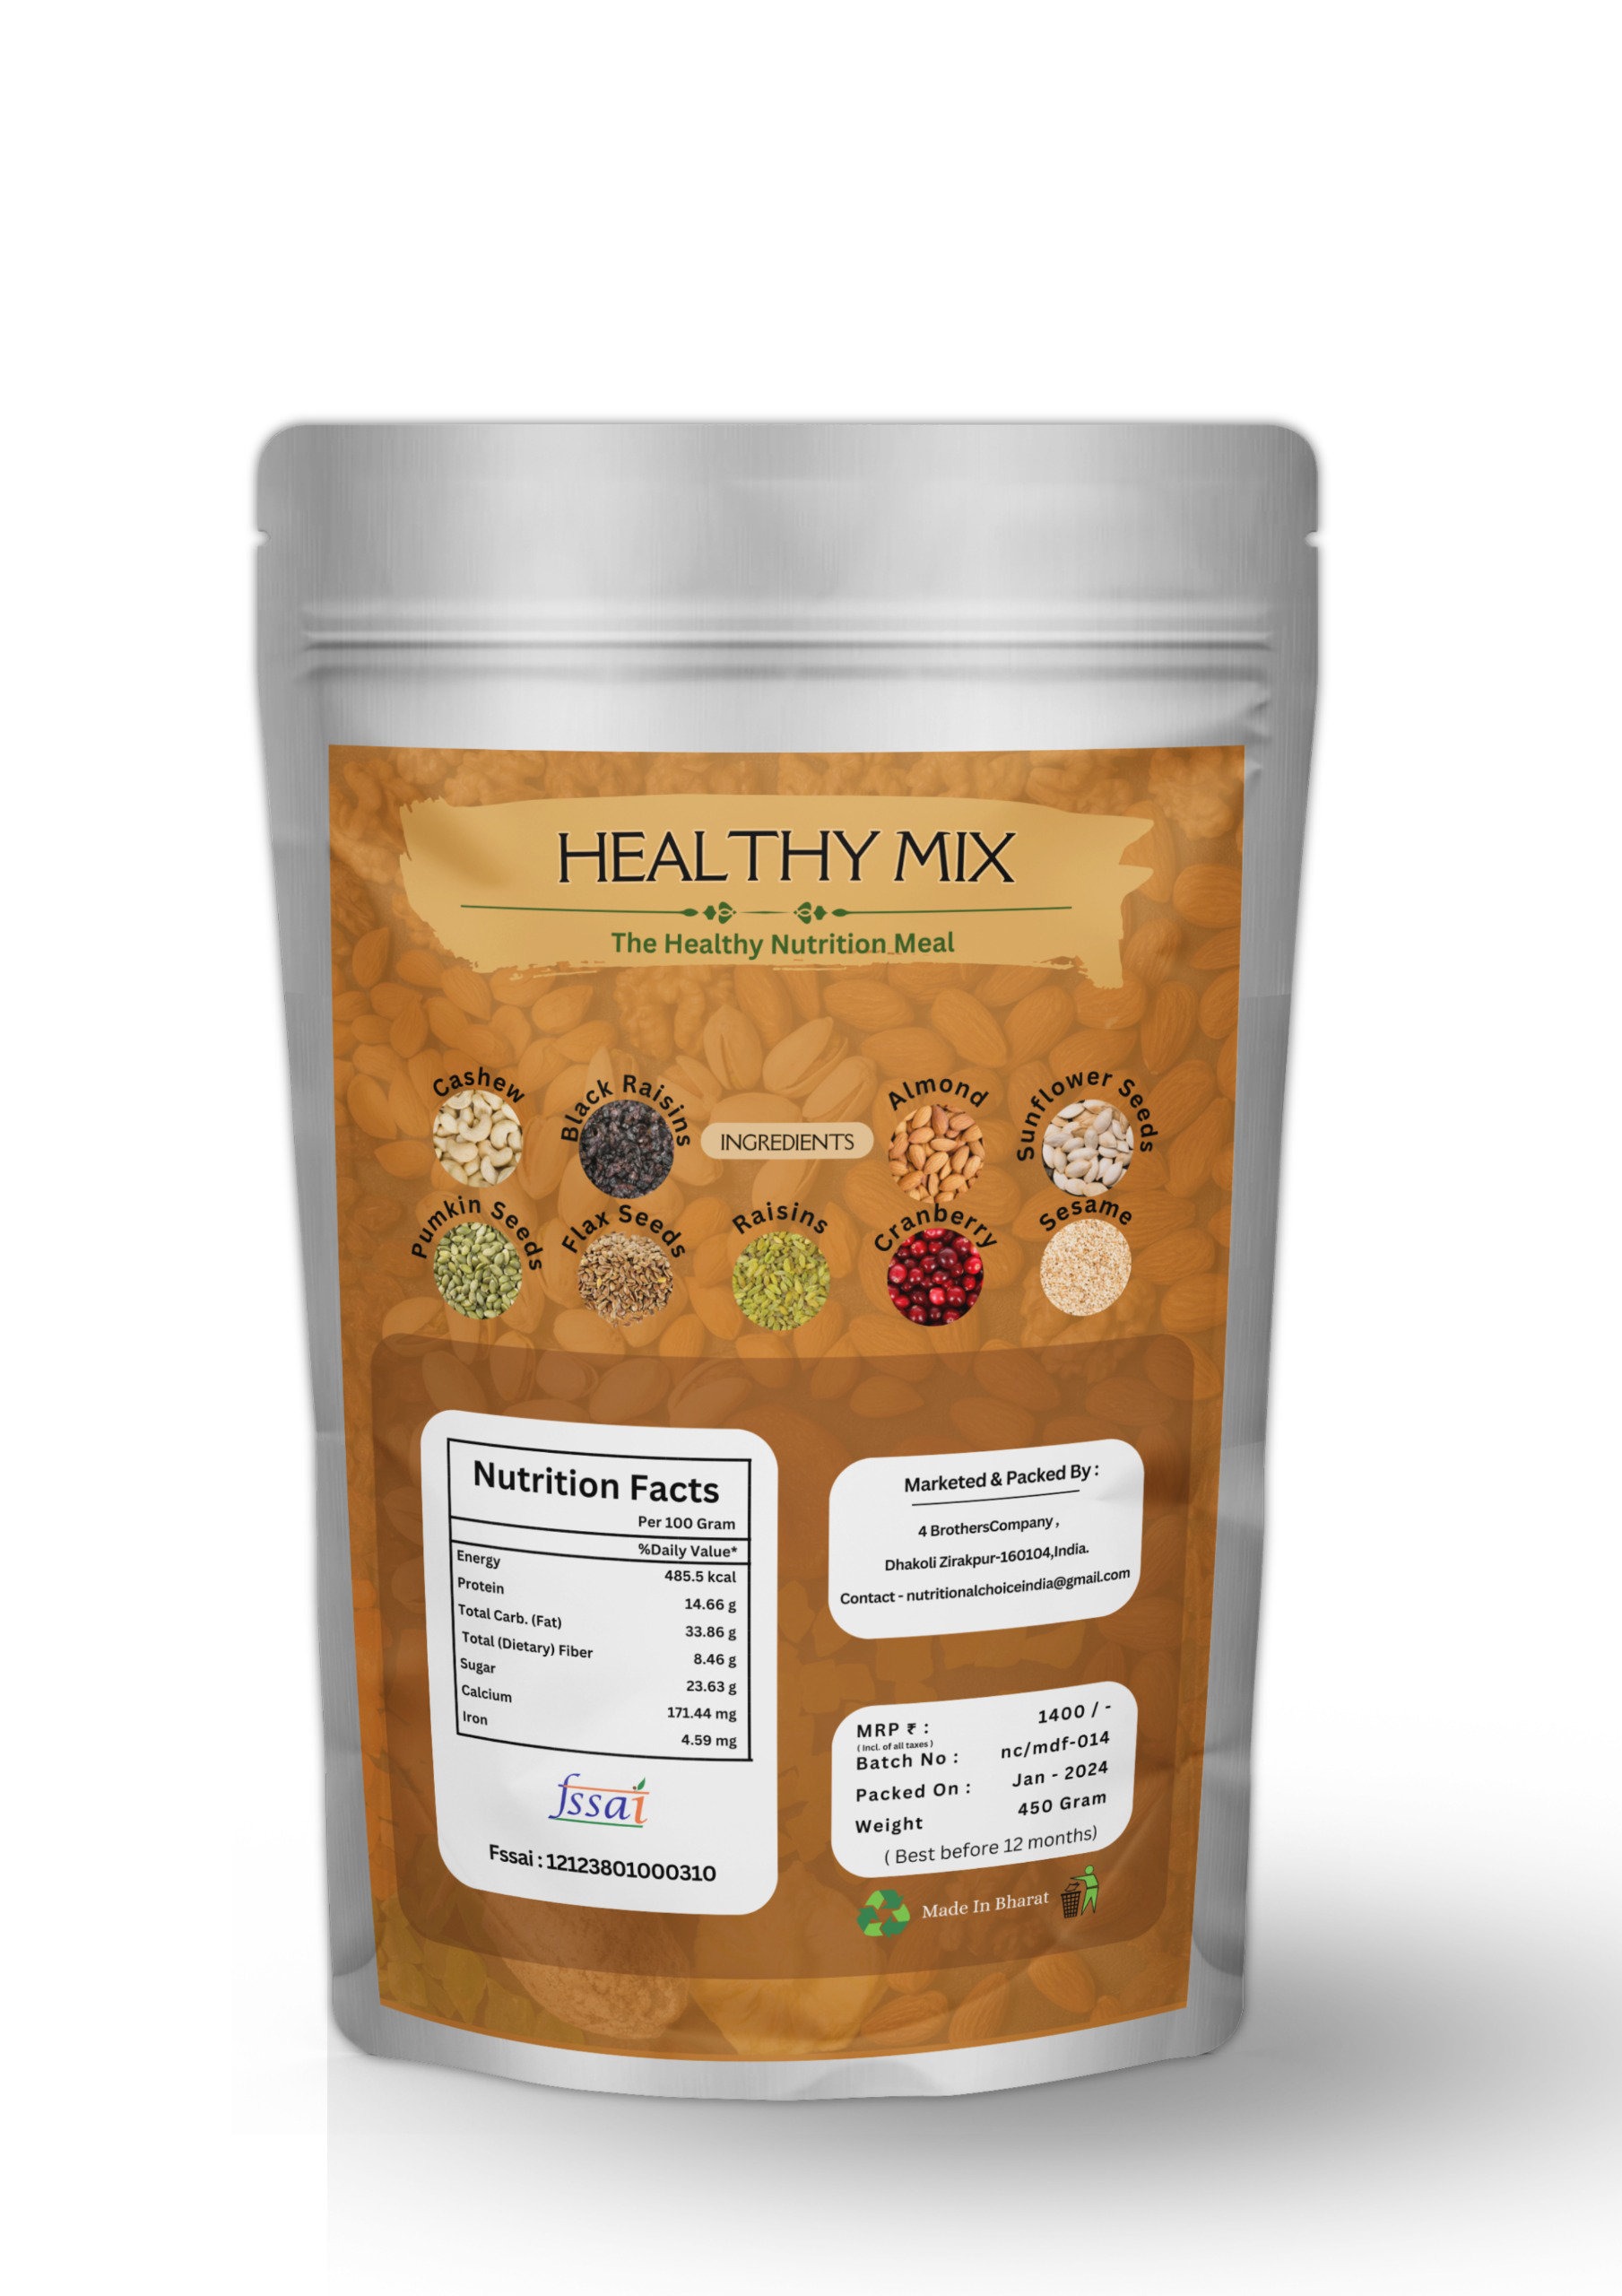 Nutritional Choice Healthy Mix | The Healthy Nutrition Meal - 450gm - 12 Months, 900gm